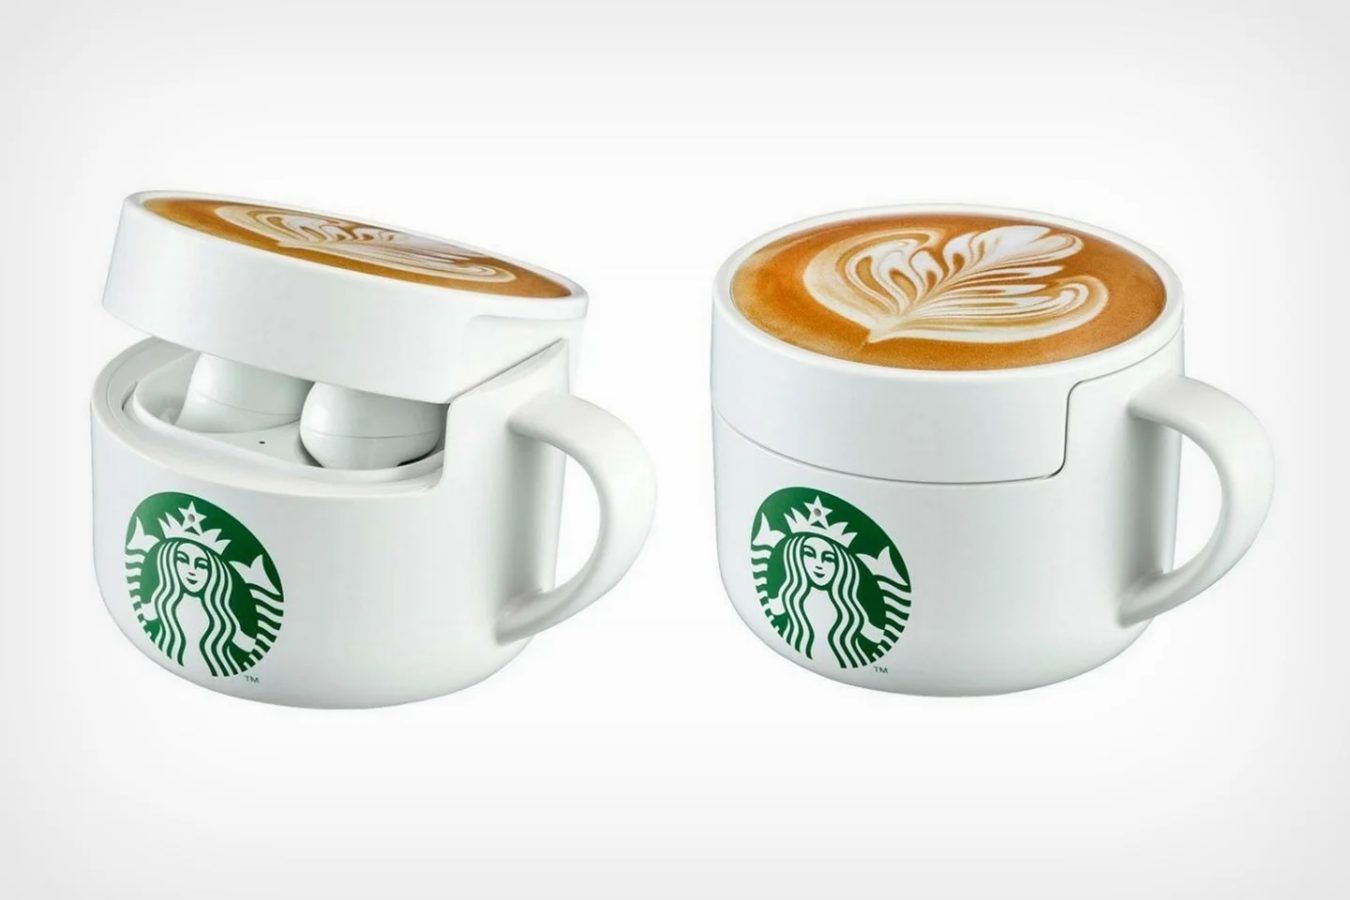 Starbucks and Samsung launch a sleek coffee-inspired tech accessories collection